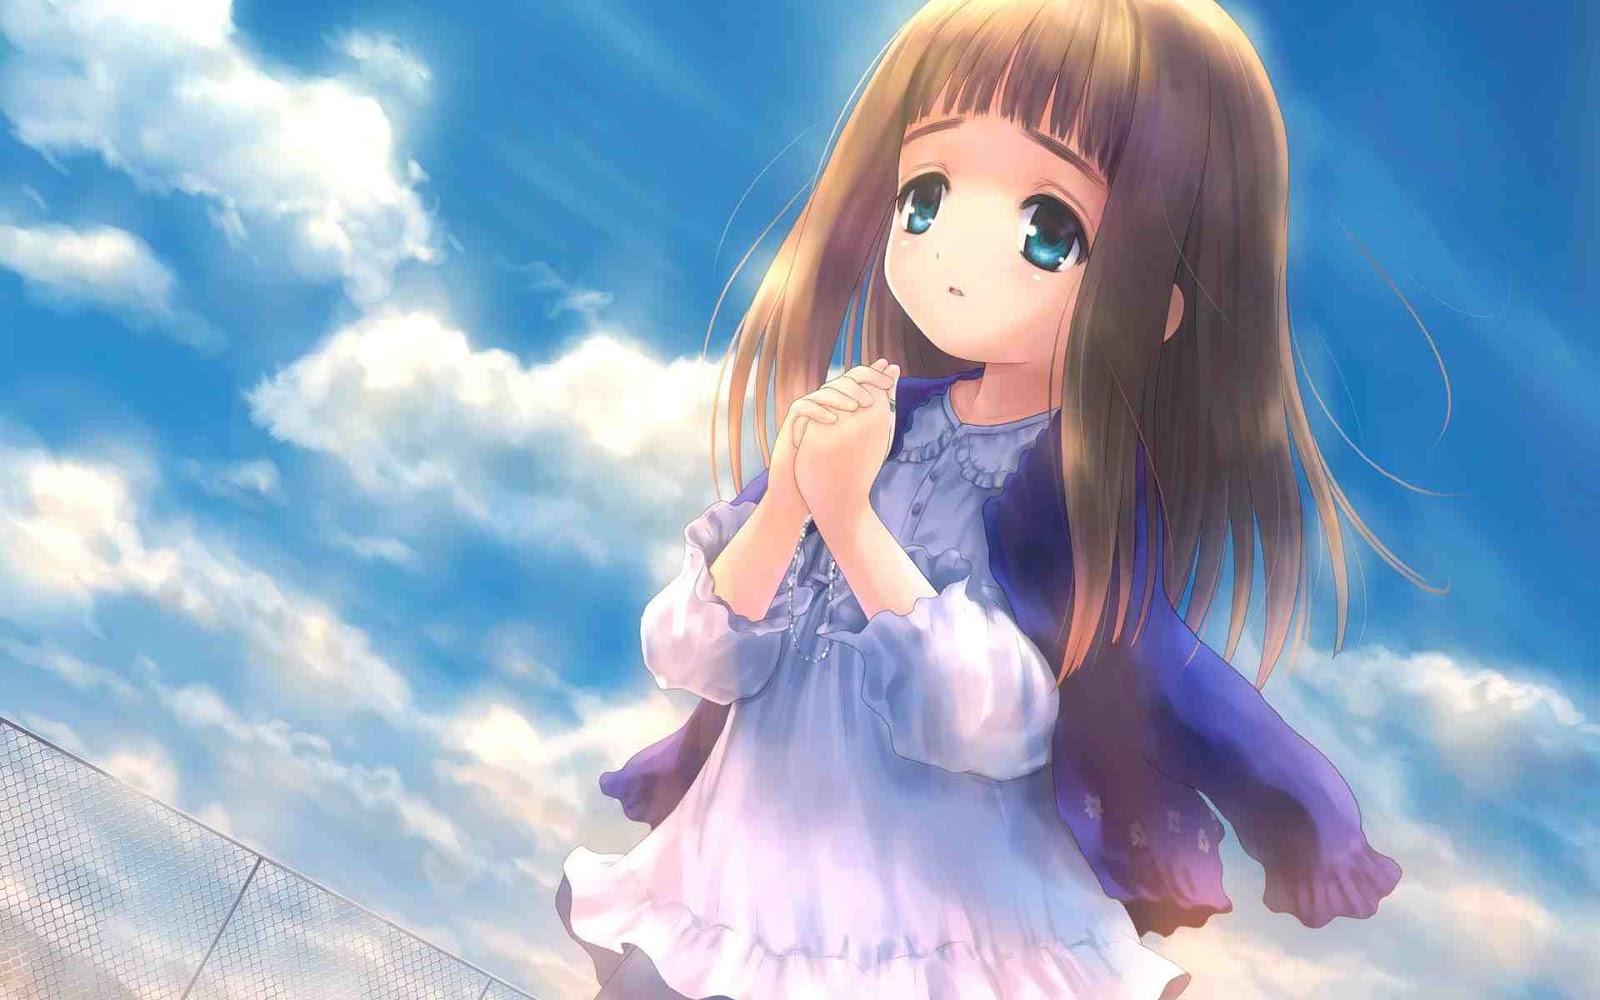 Prayer of the Angel - Other & Anime Background Wallpapers on Desktop Nexus  (Image 1296988)